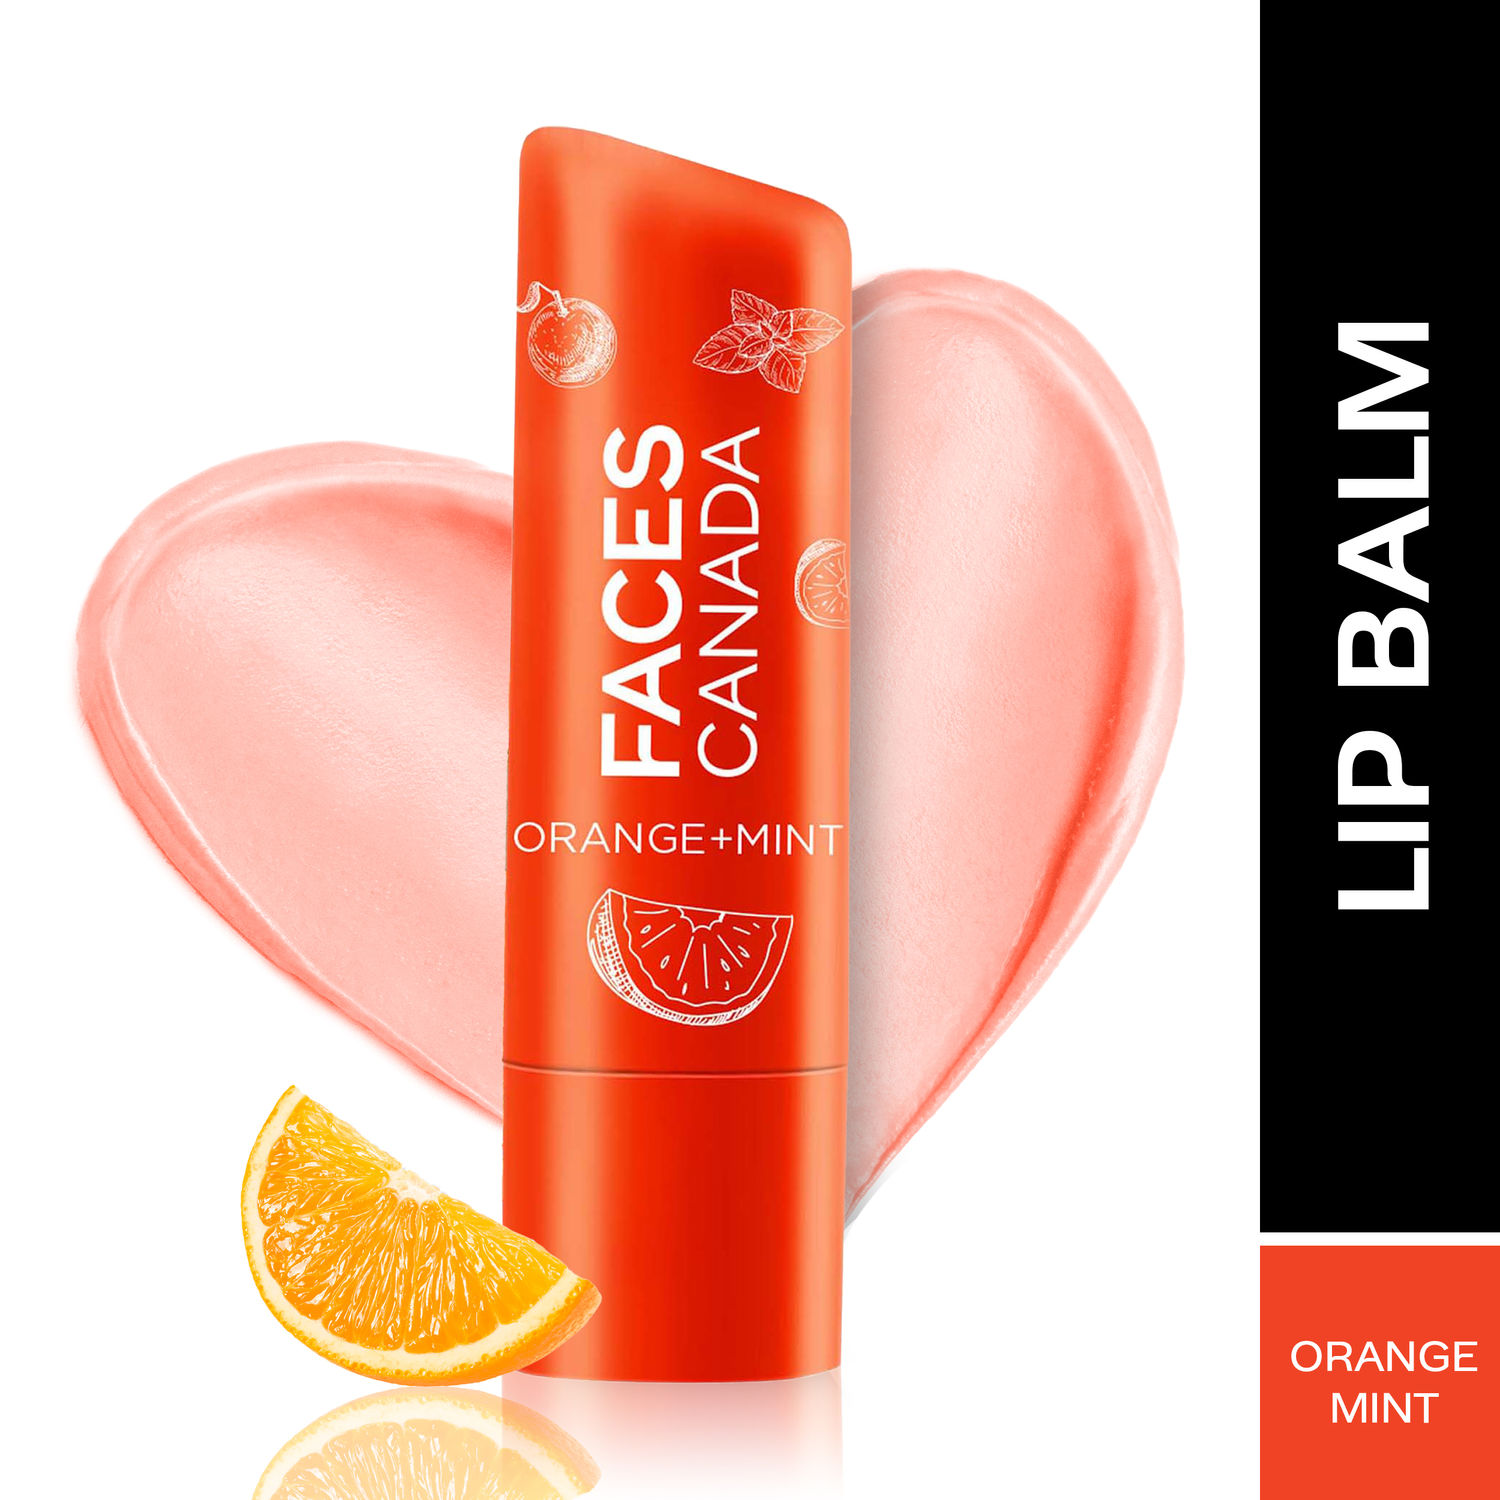 Buy FACES CANADA Lip Balm - Orange Mint, 4.5g | 12HR Moisture | SPF 15 | Shea Butter, Vitamin C & E Enriched | Hydrating & Nourishing For Dry Chapped Lips - Purplle